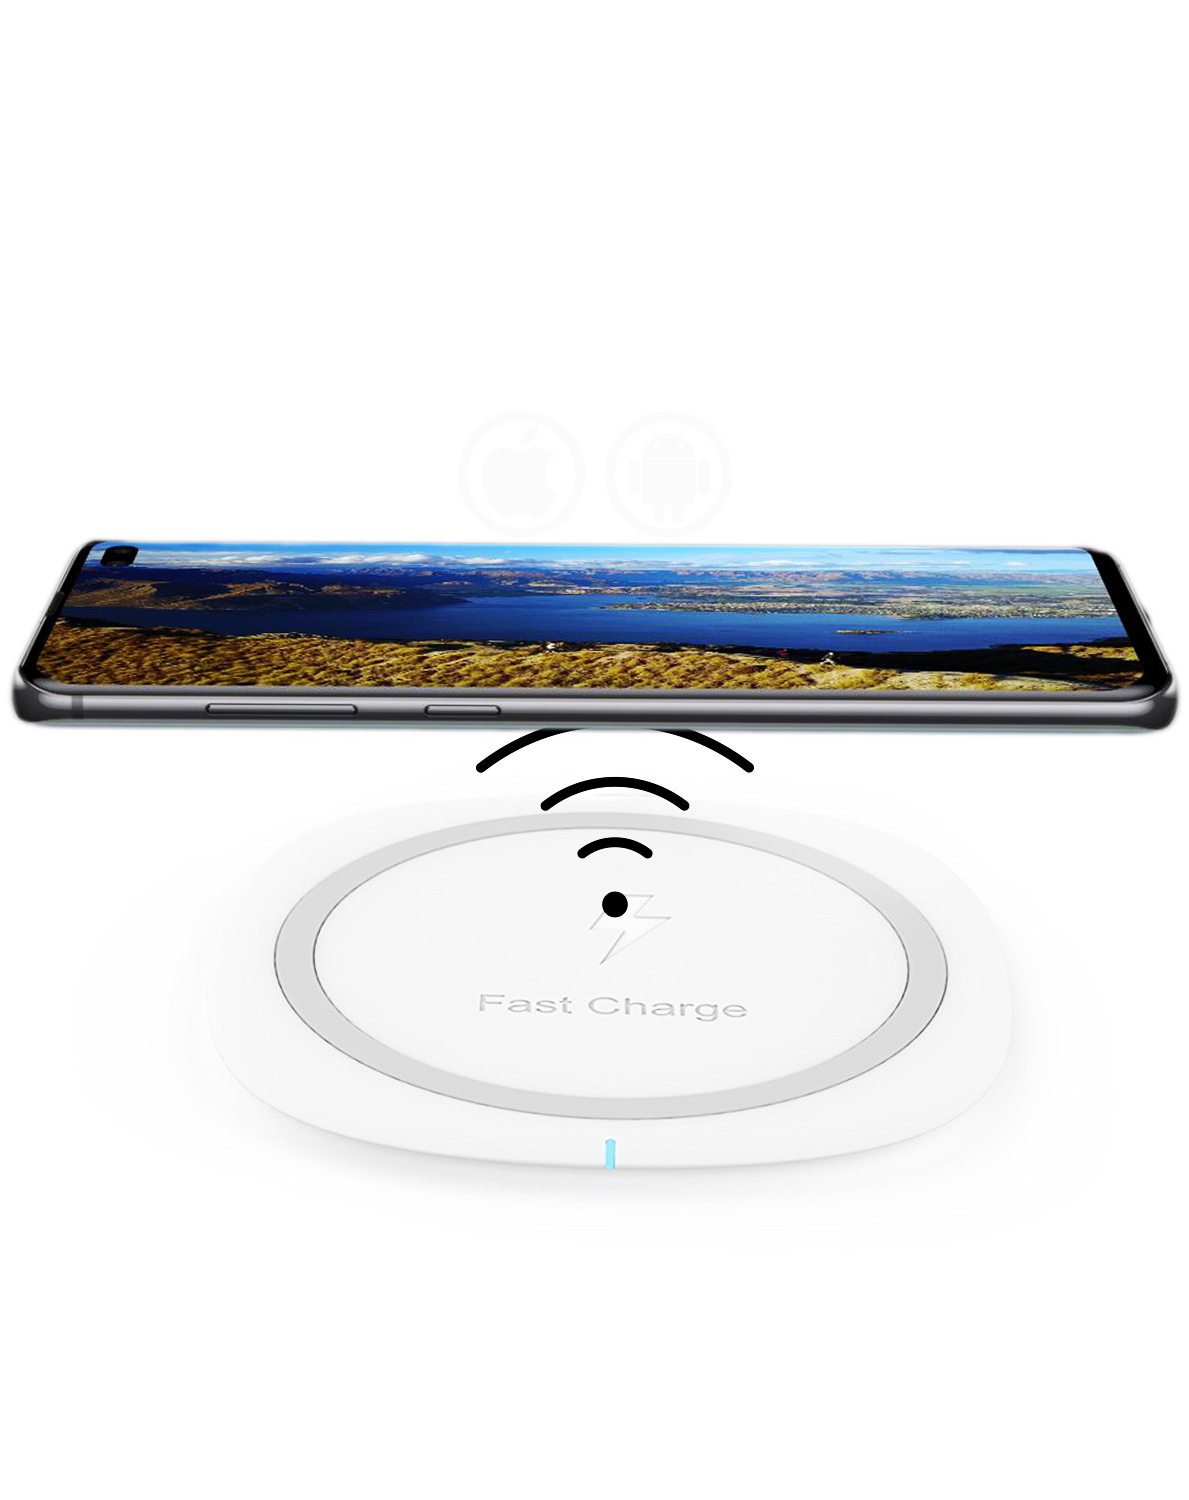 Fast Charge Wireless Charger for Samsung Galaxy M10; 10W Qi Certified Fast Charge; Wireless Charging Pad Compatible with Samsung Galaxy S10/S10+/S10e/S10 5G/A10/A30/A50/Fold/M10/M20/M30